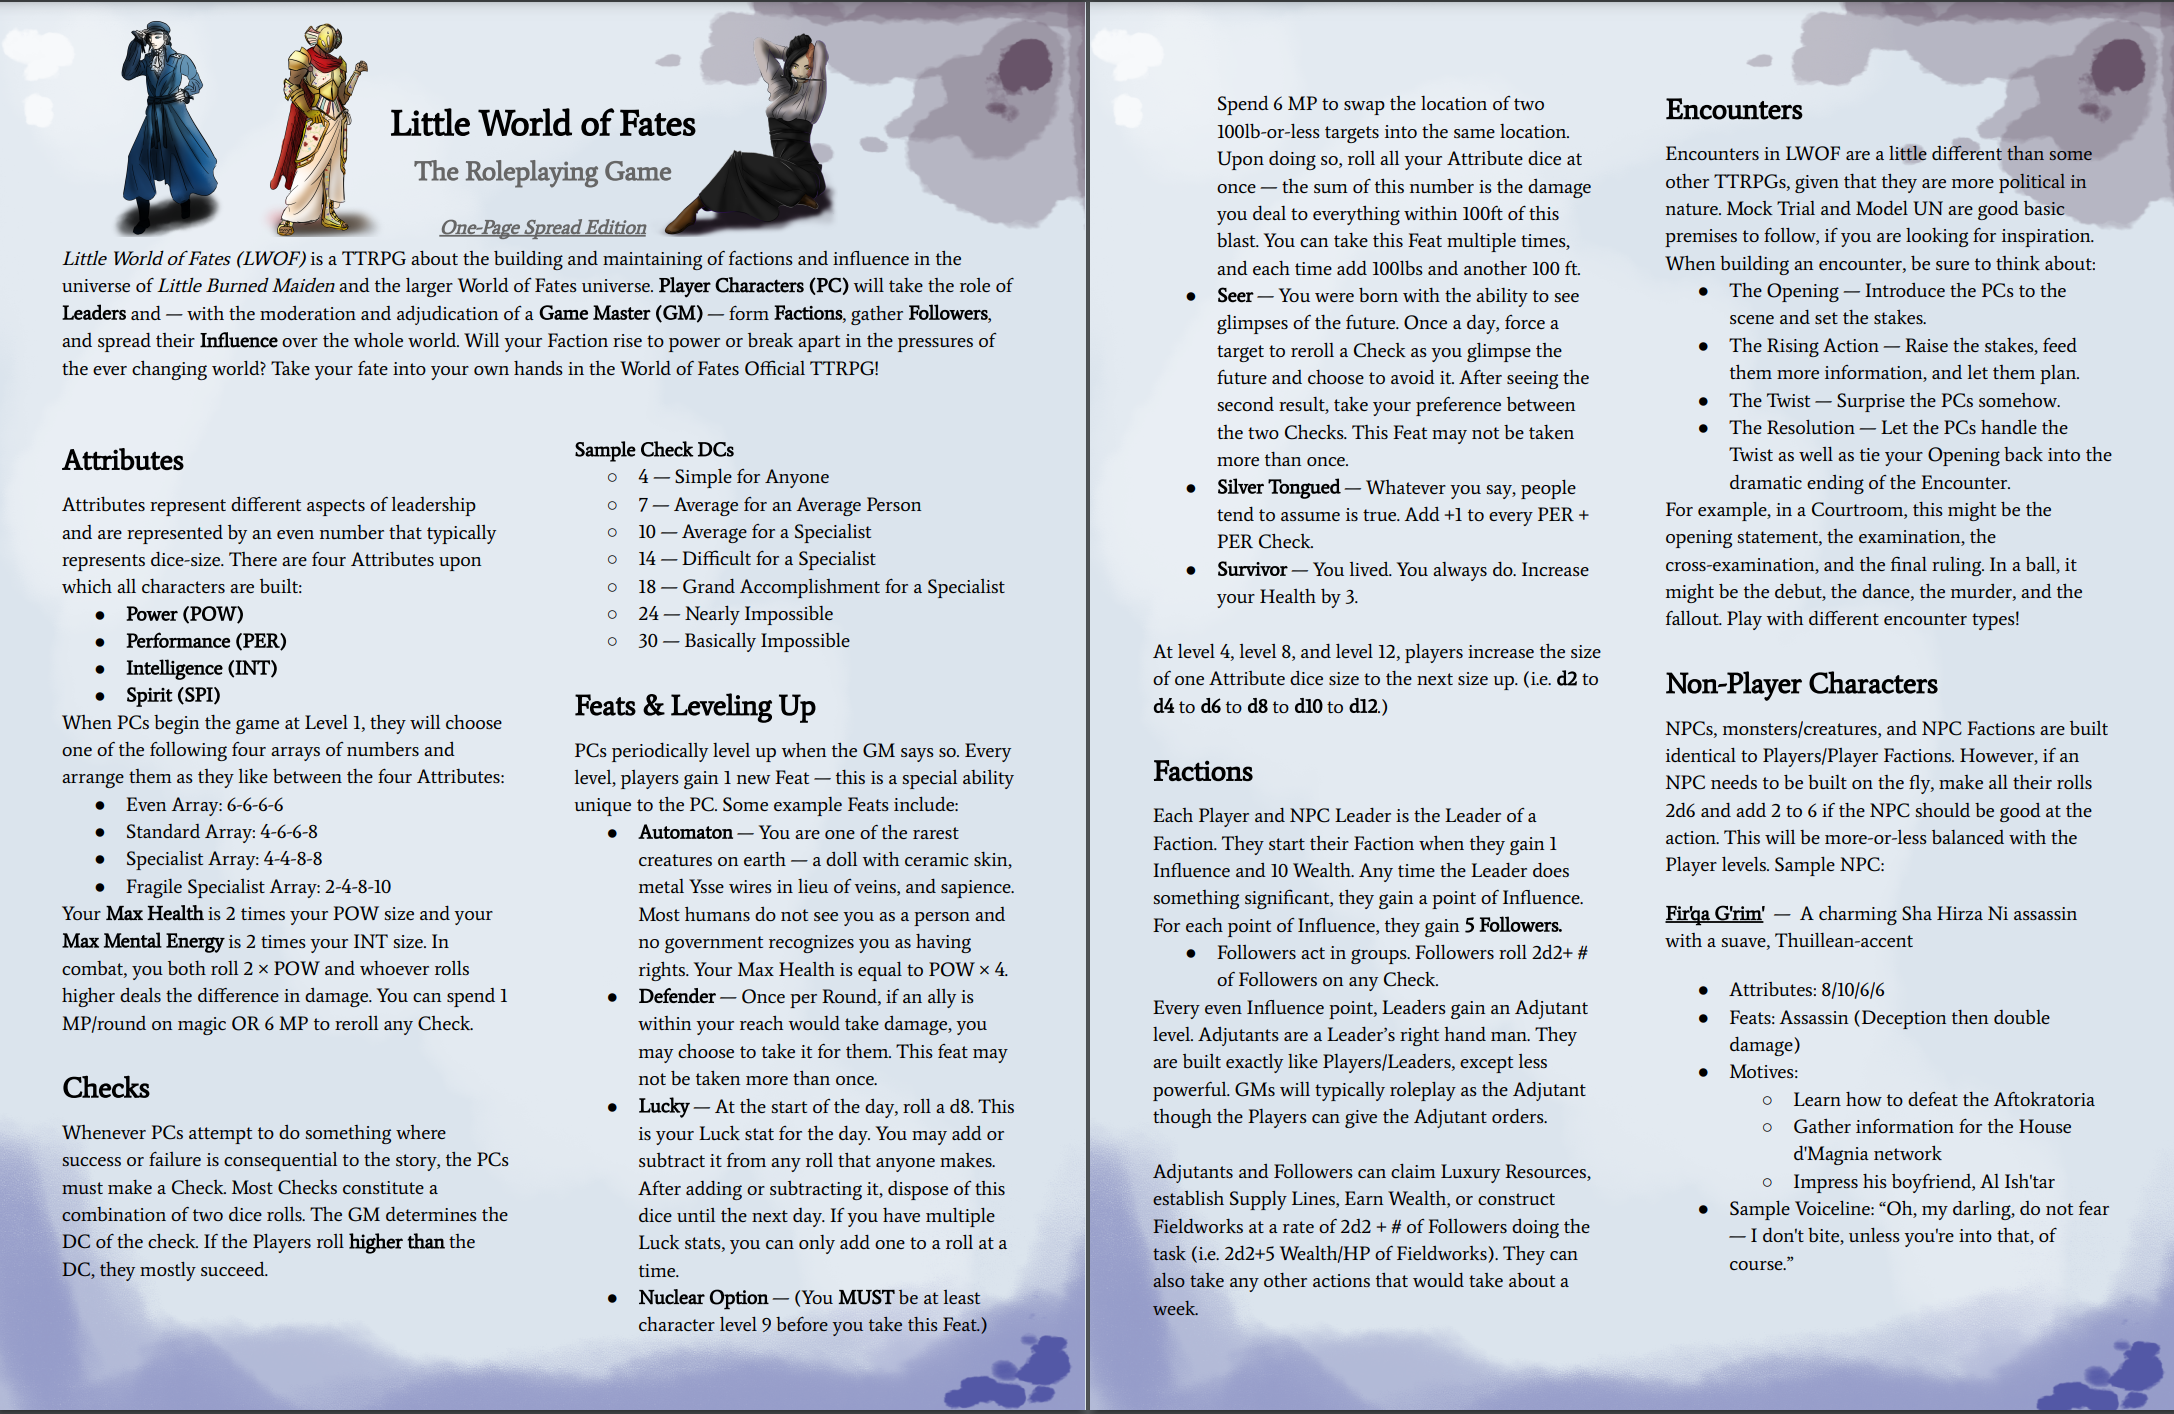 Little World of Fates - One-Page-Spread Edition